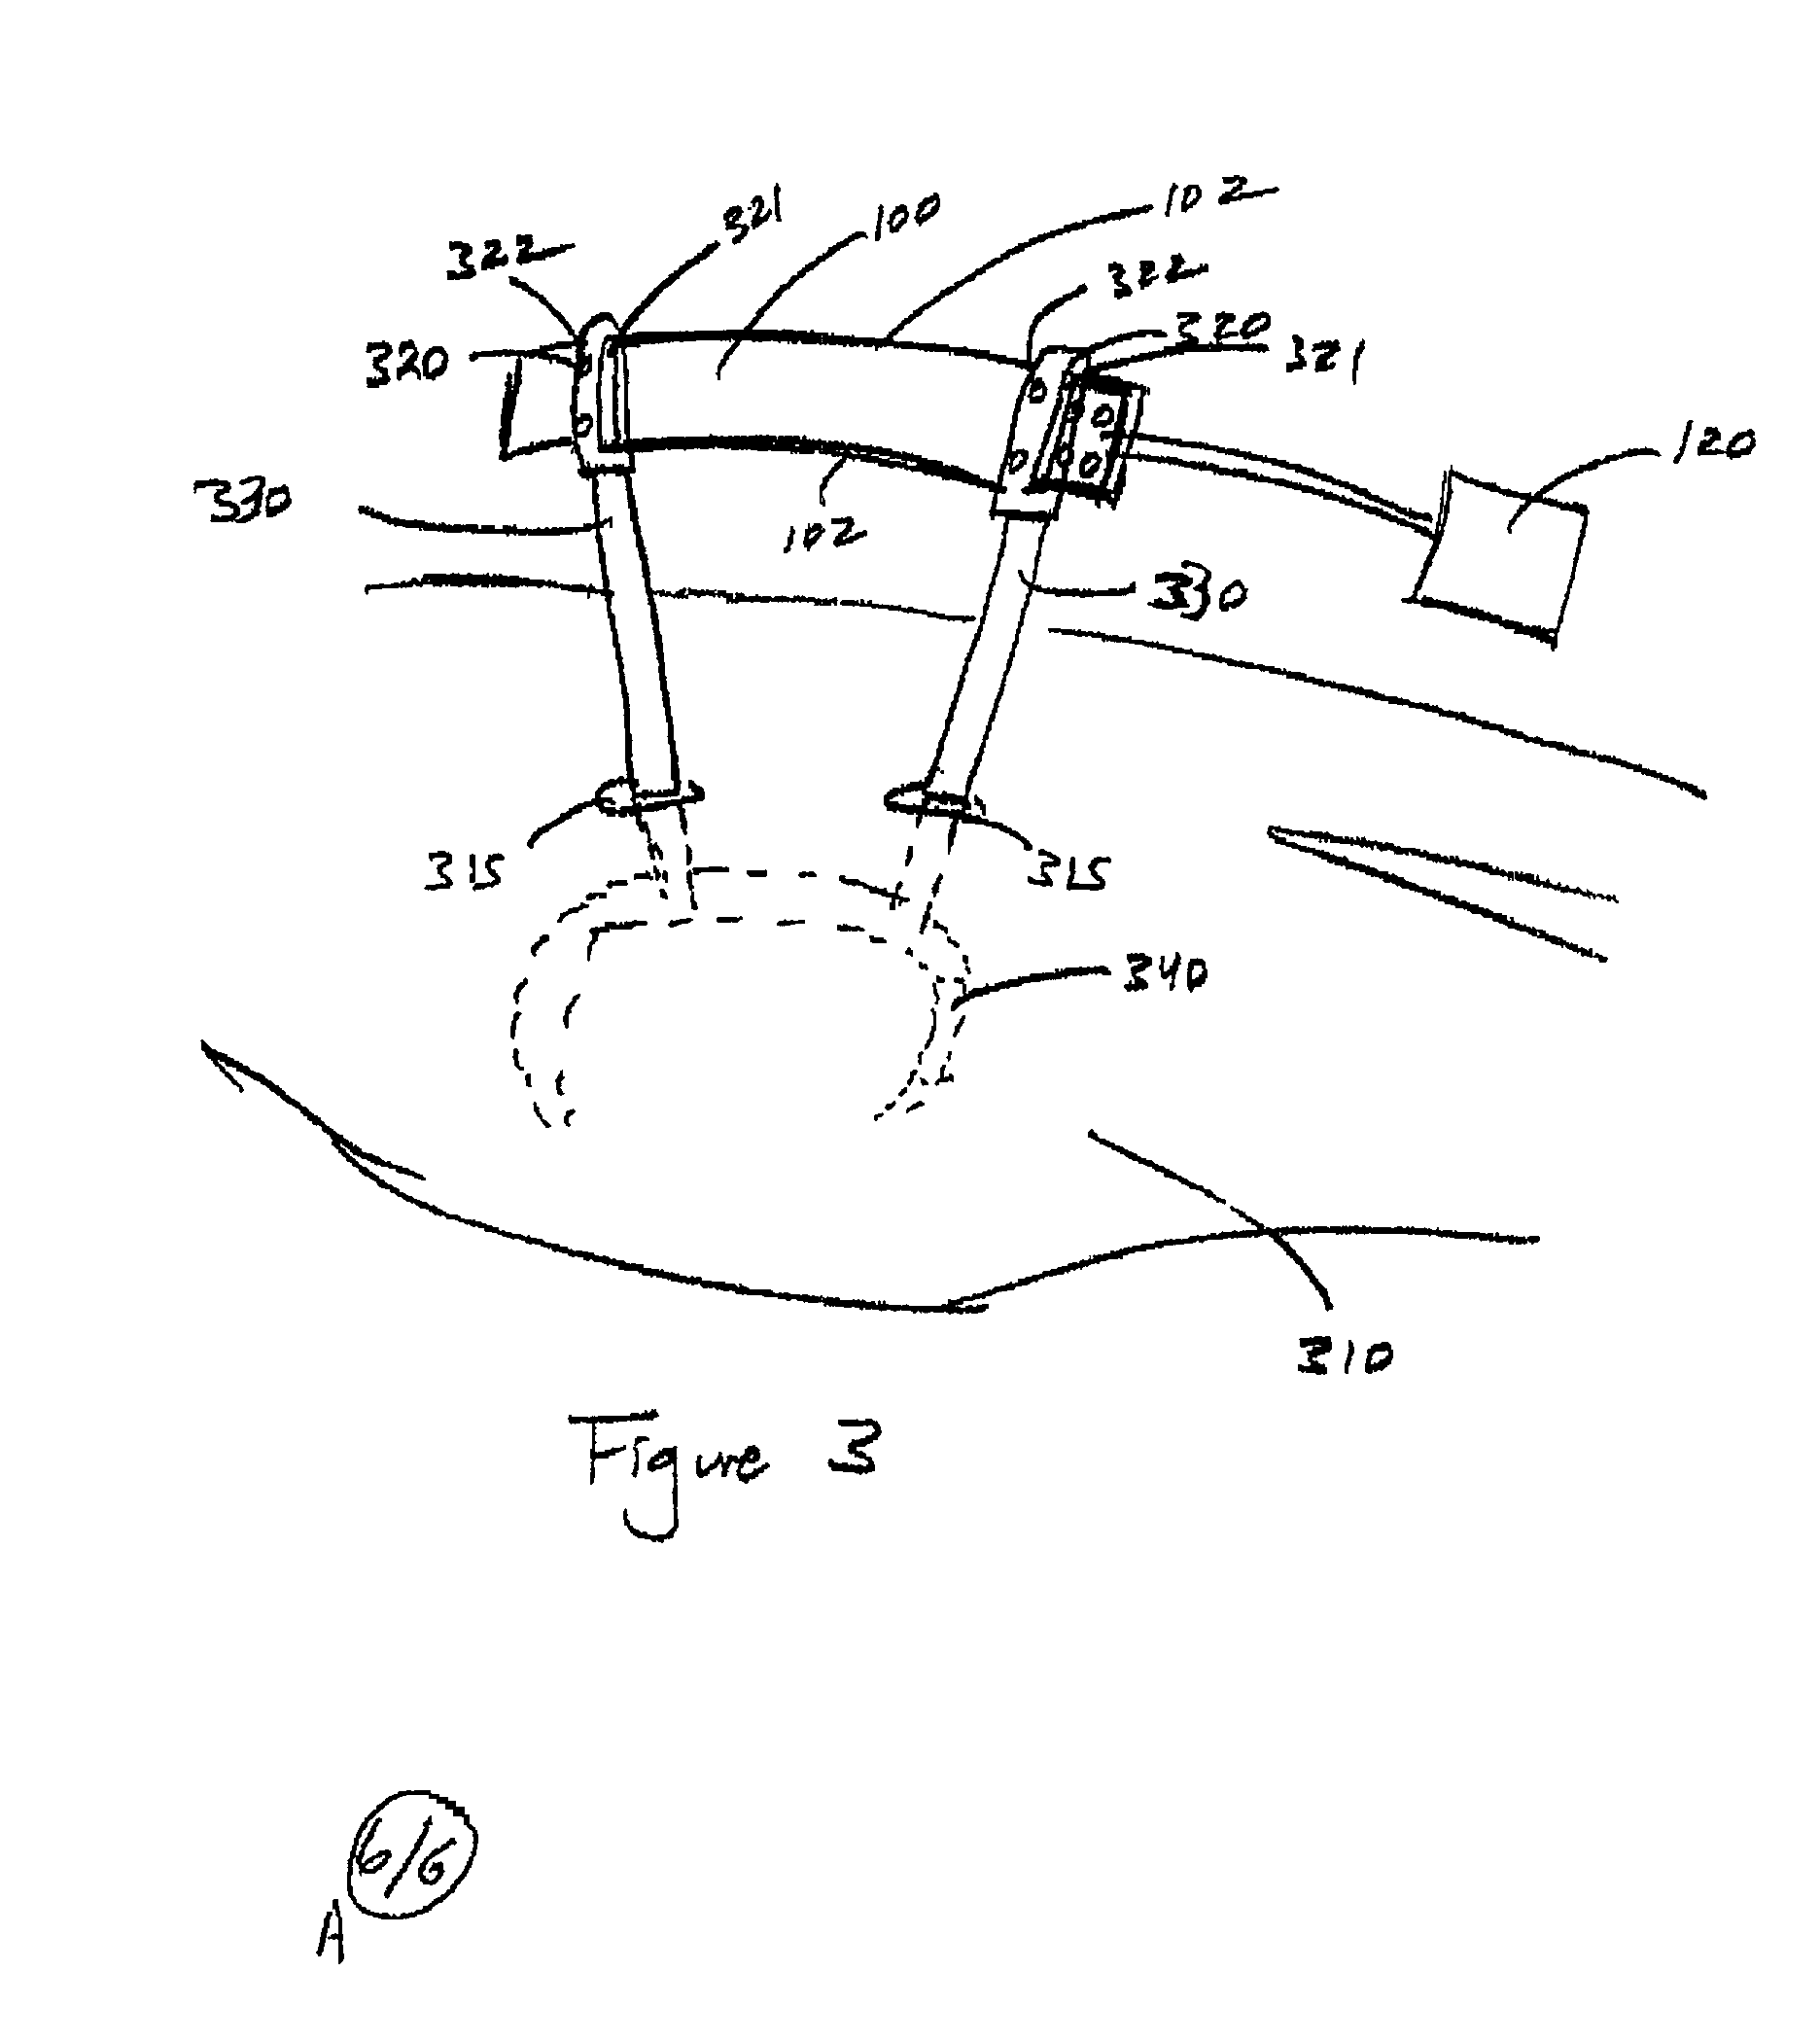 System and method for automatic shape registration and instrument tracking